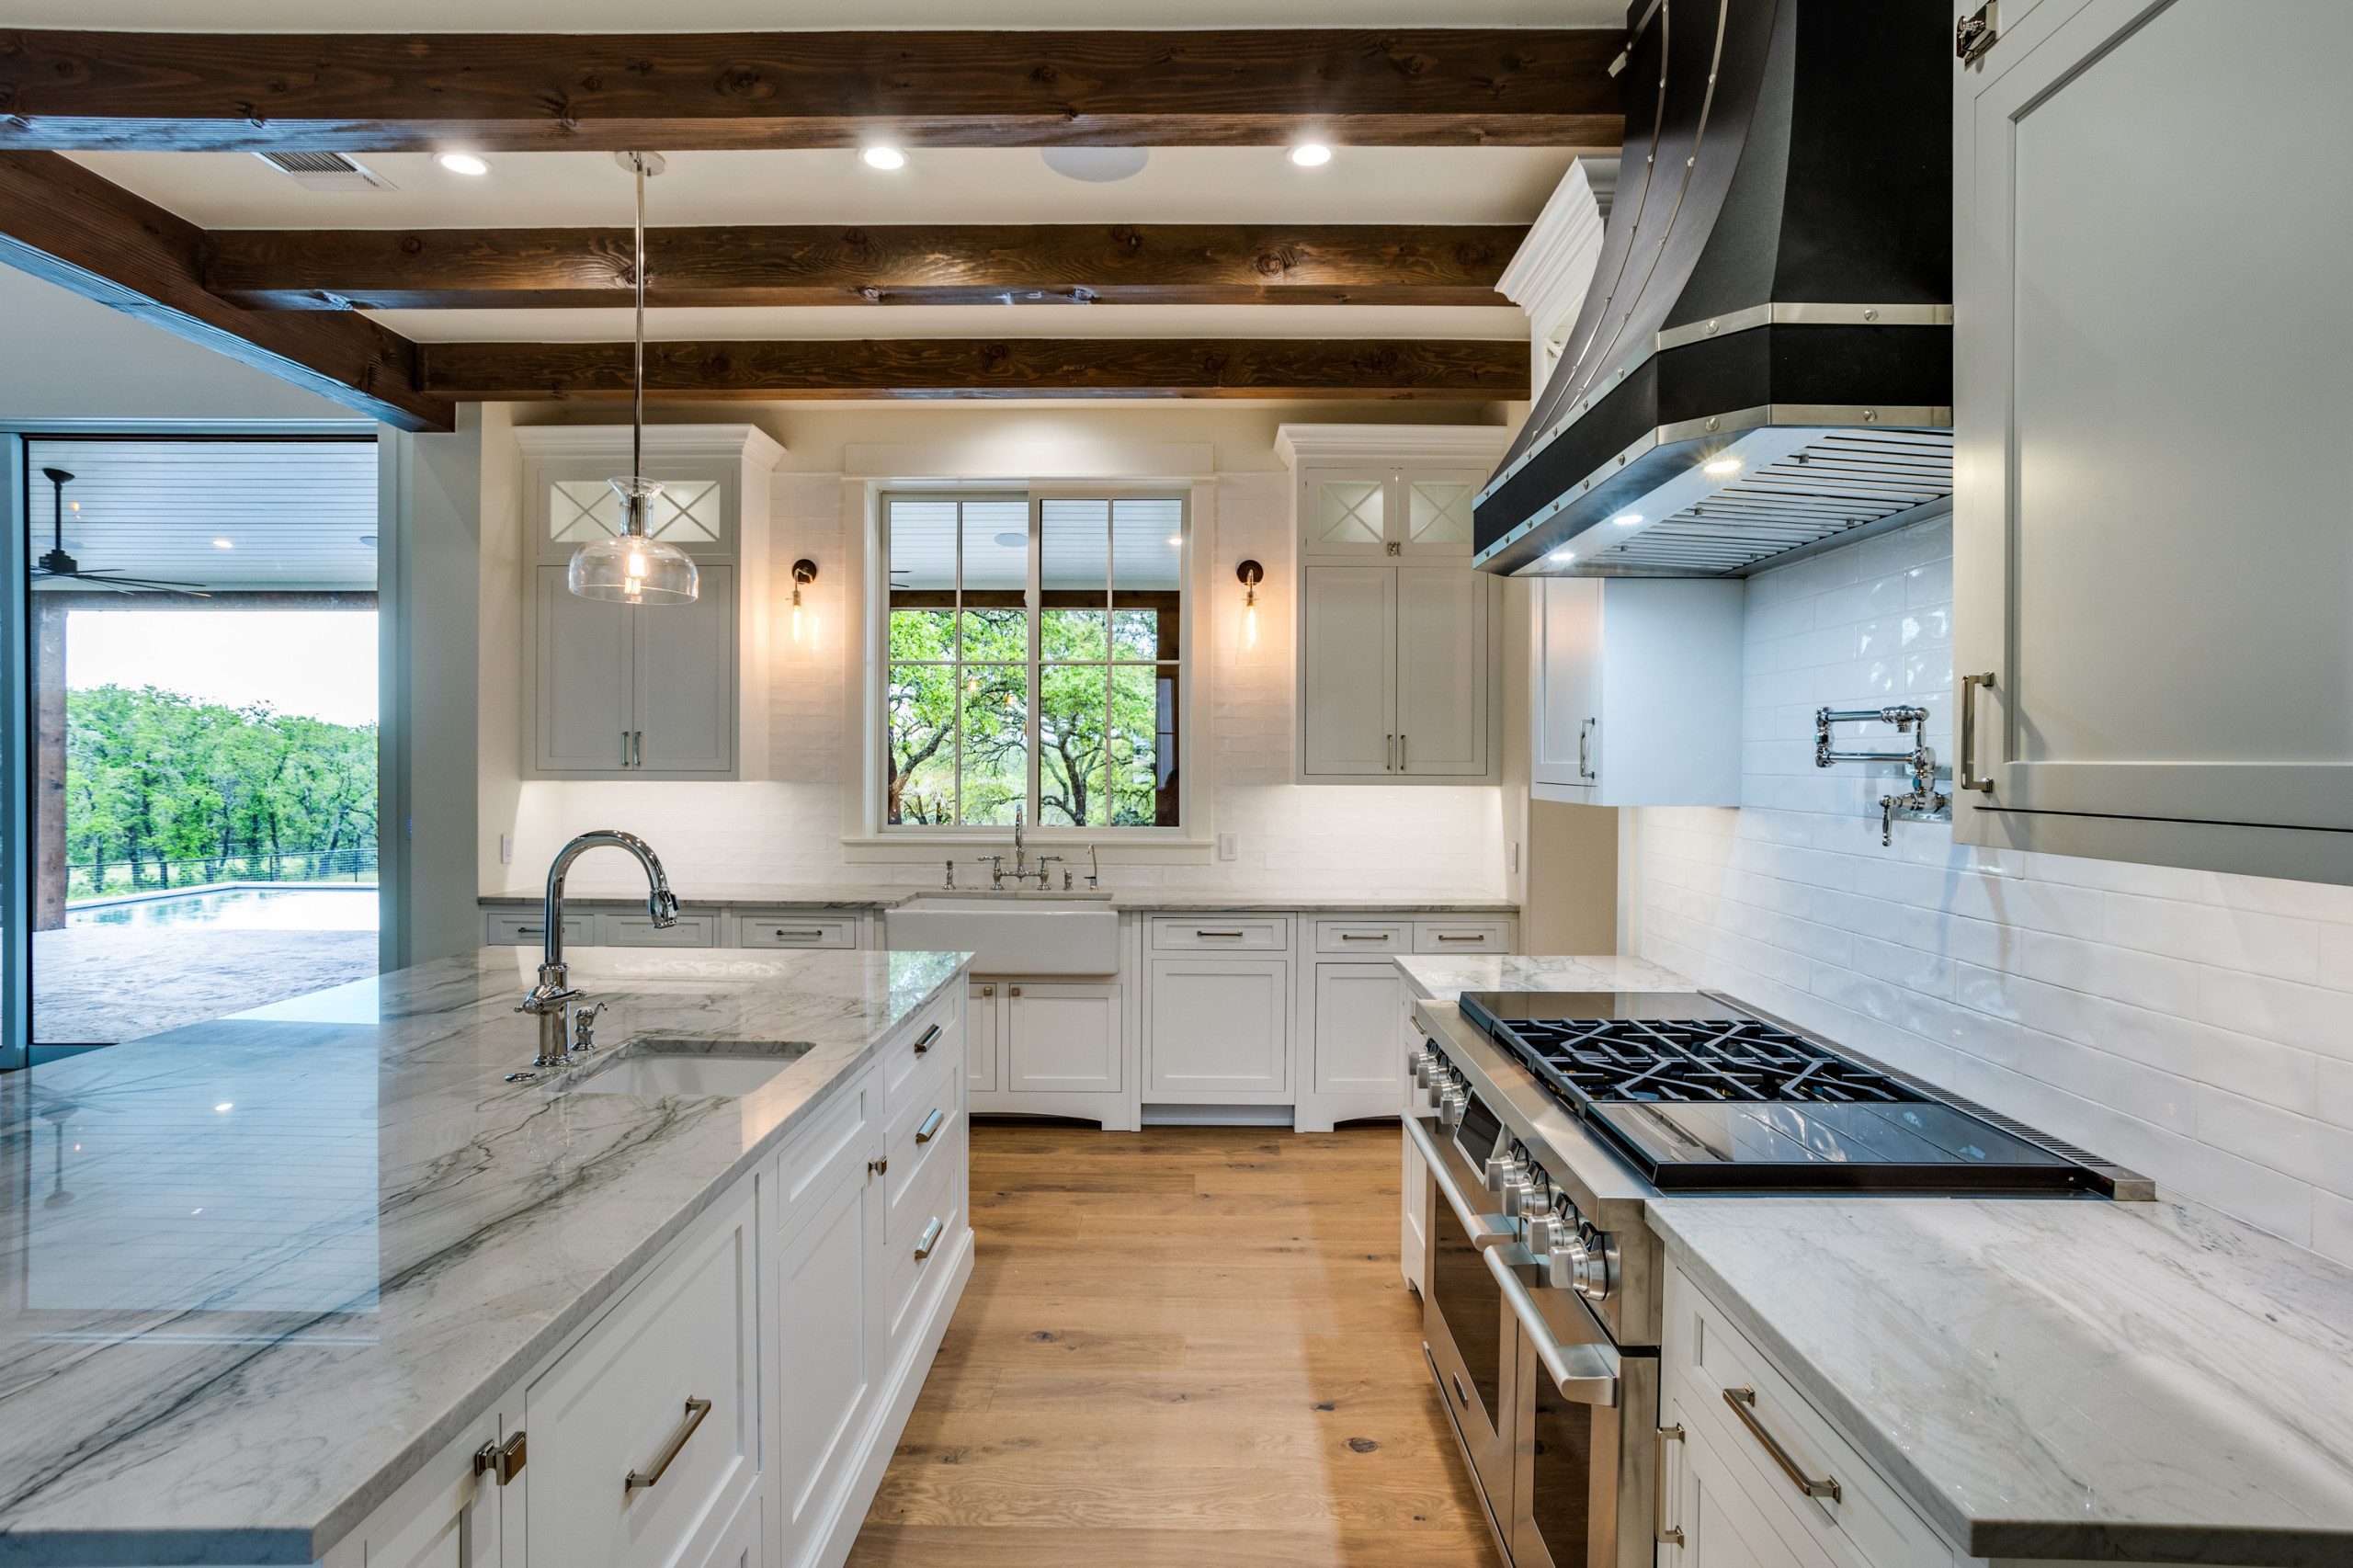 What should you not forget when remodeling kitchen